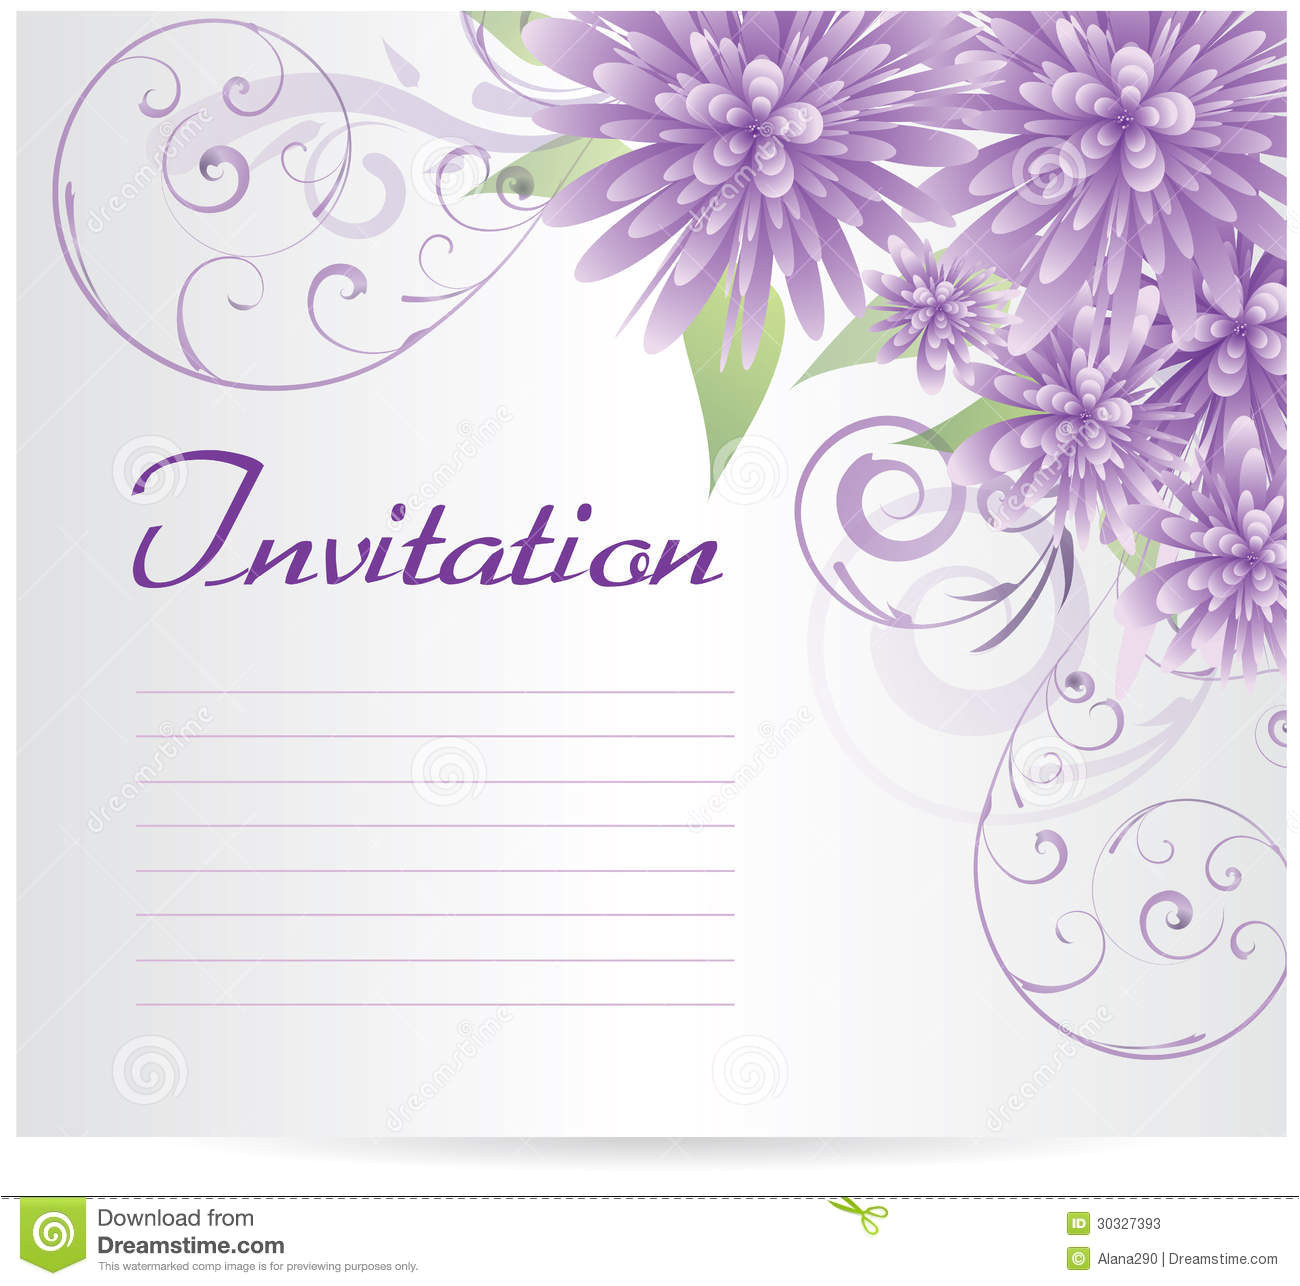 stock photos invitation template blank purple abstract flowers swirl floral elements image30327393